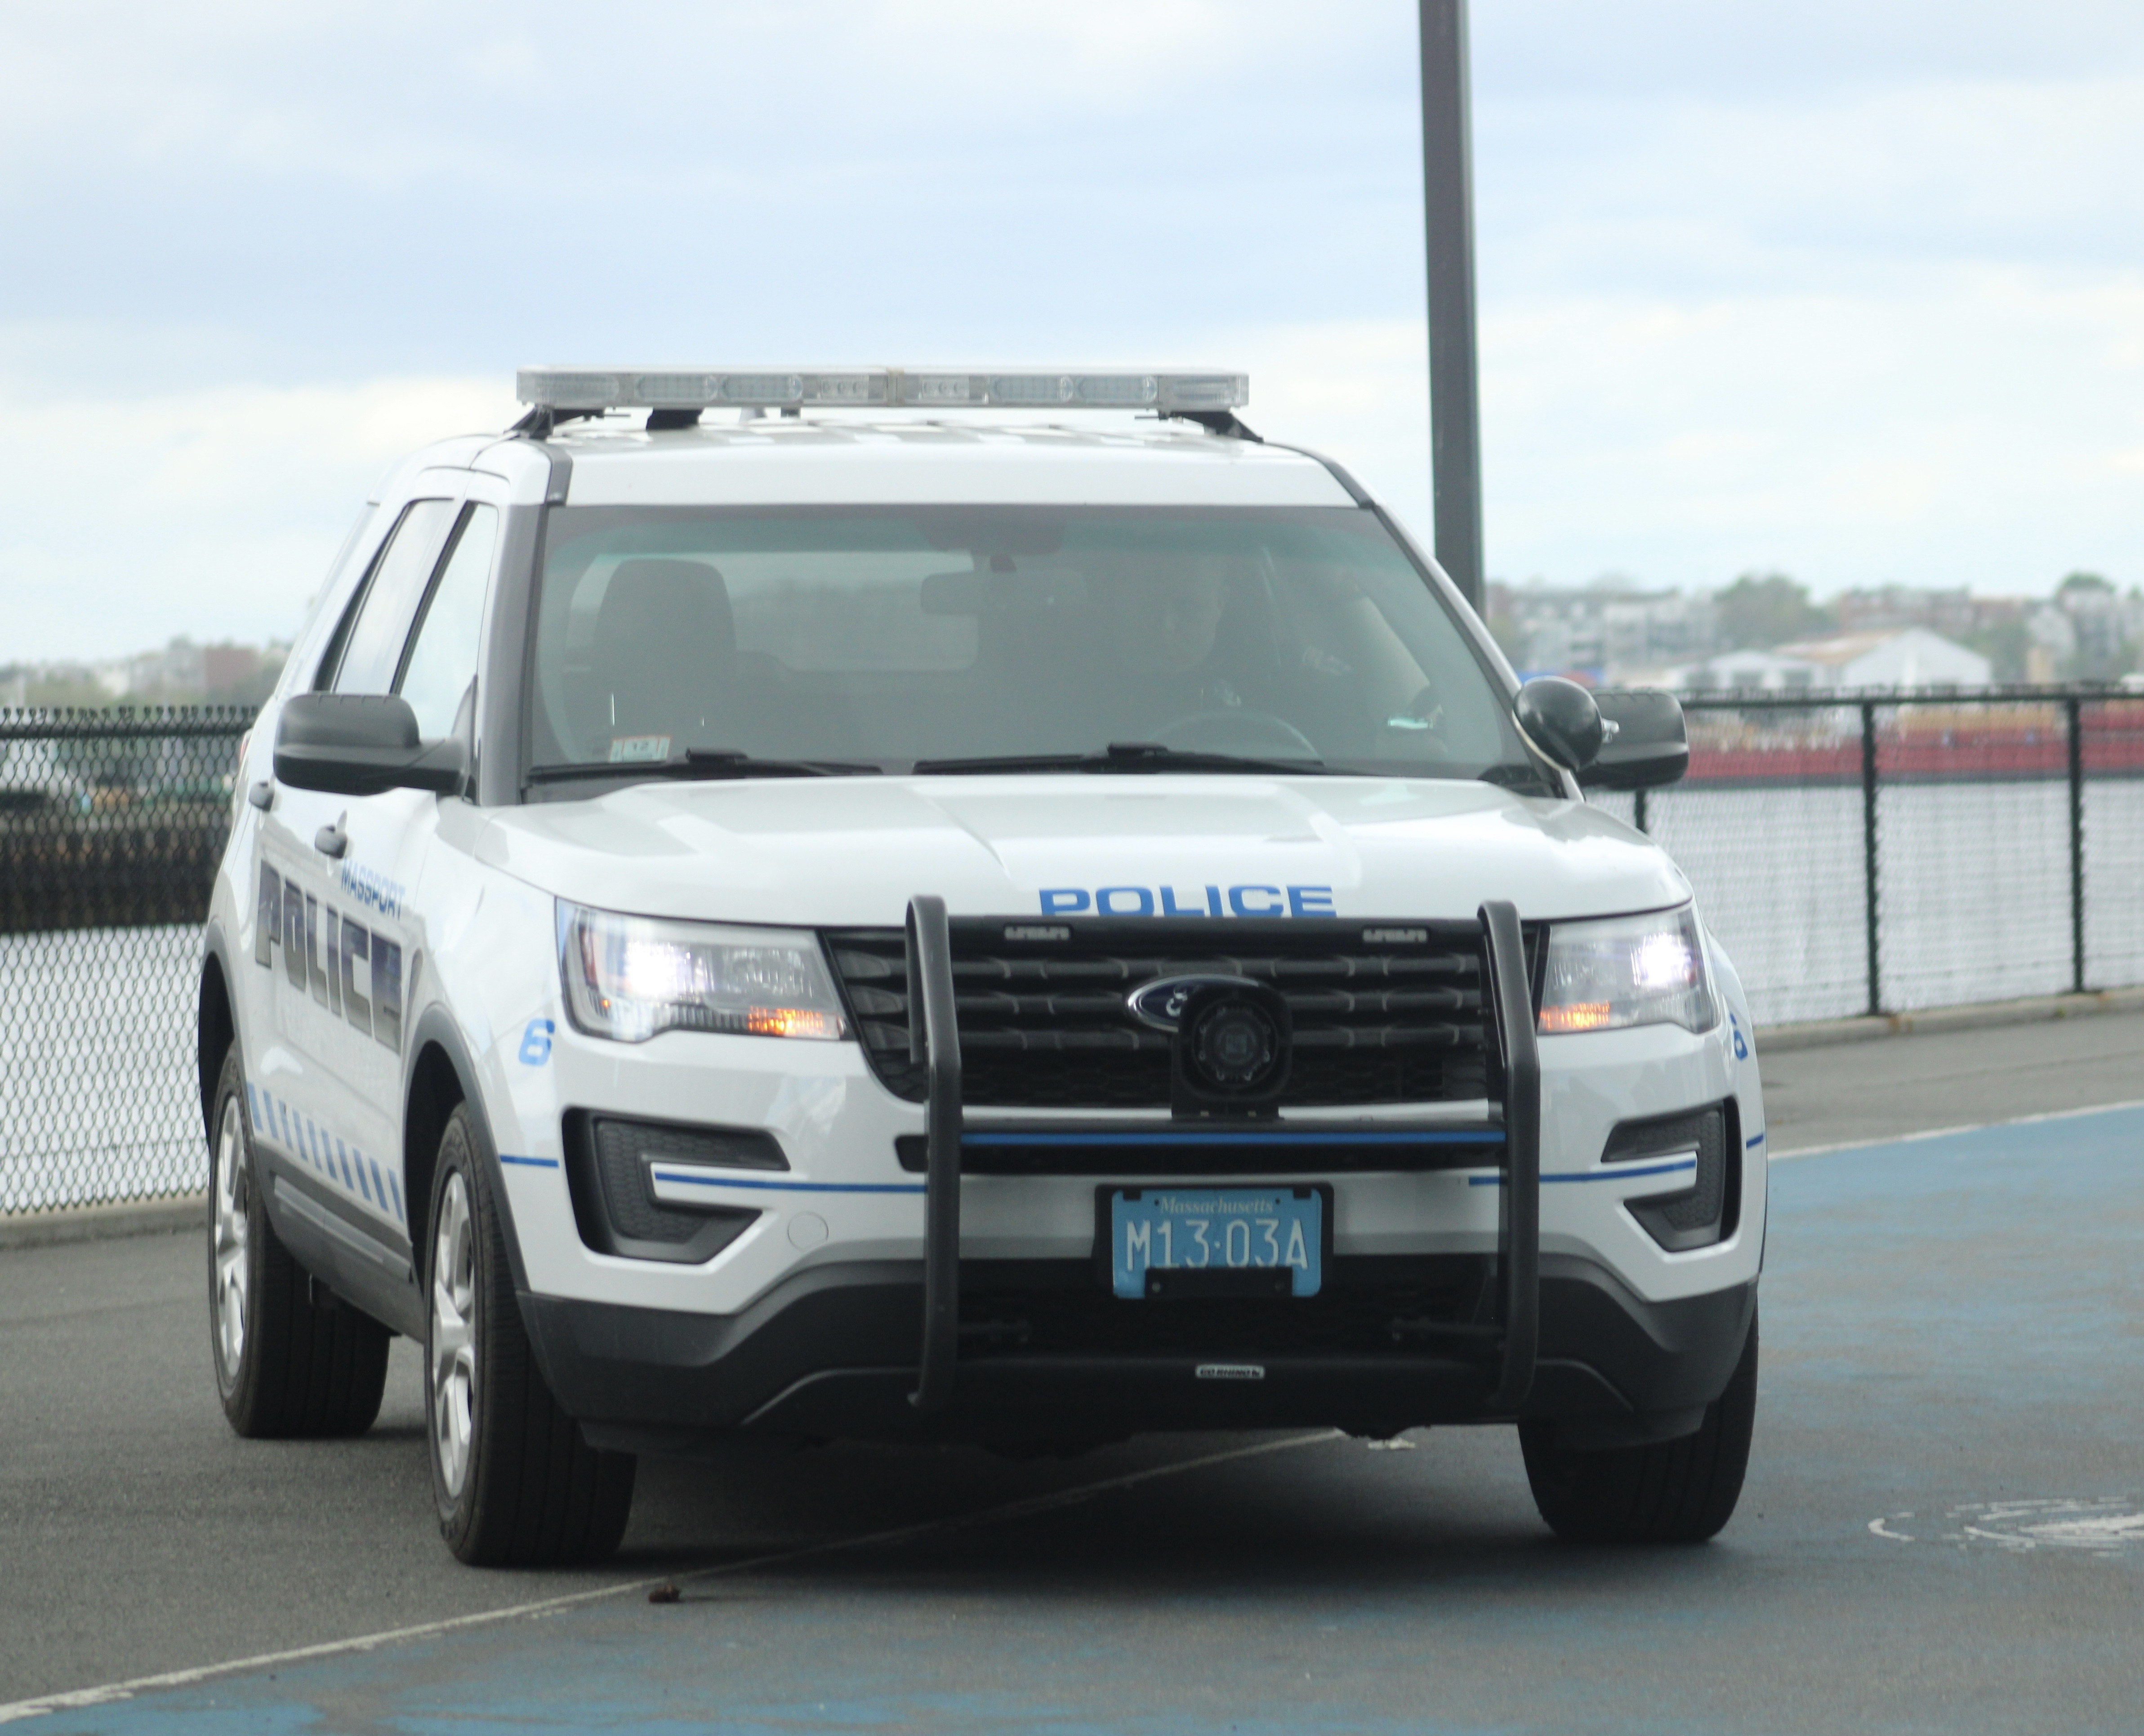 A photo  of Massport Police
            Car 8, a 2017 Ford Police Interceptor Utility             taken by @riemergencyvehicles